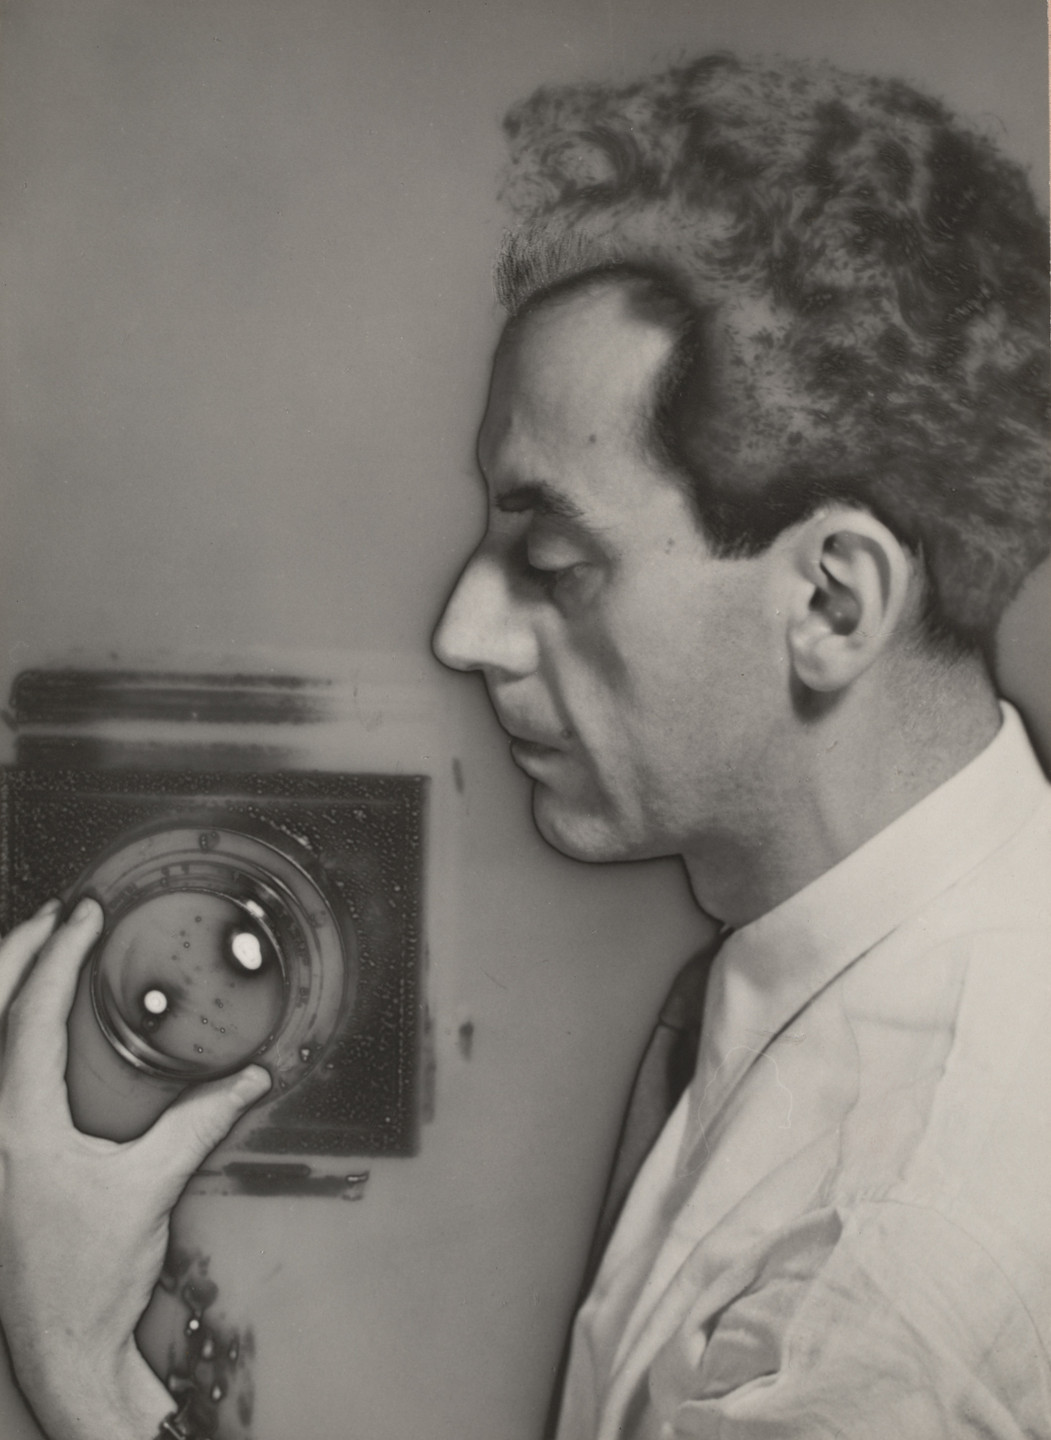 Man Ray (Emmanuel Radnitzky), Self-Portrait with Camera, 1931, Museum of Modern Art, New York. https://www.moma.org/collection/works/46309